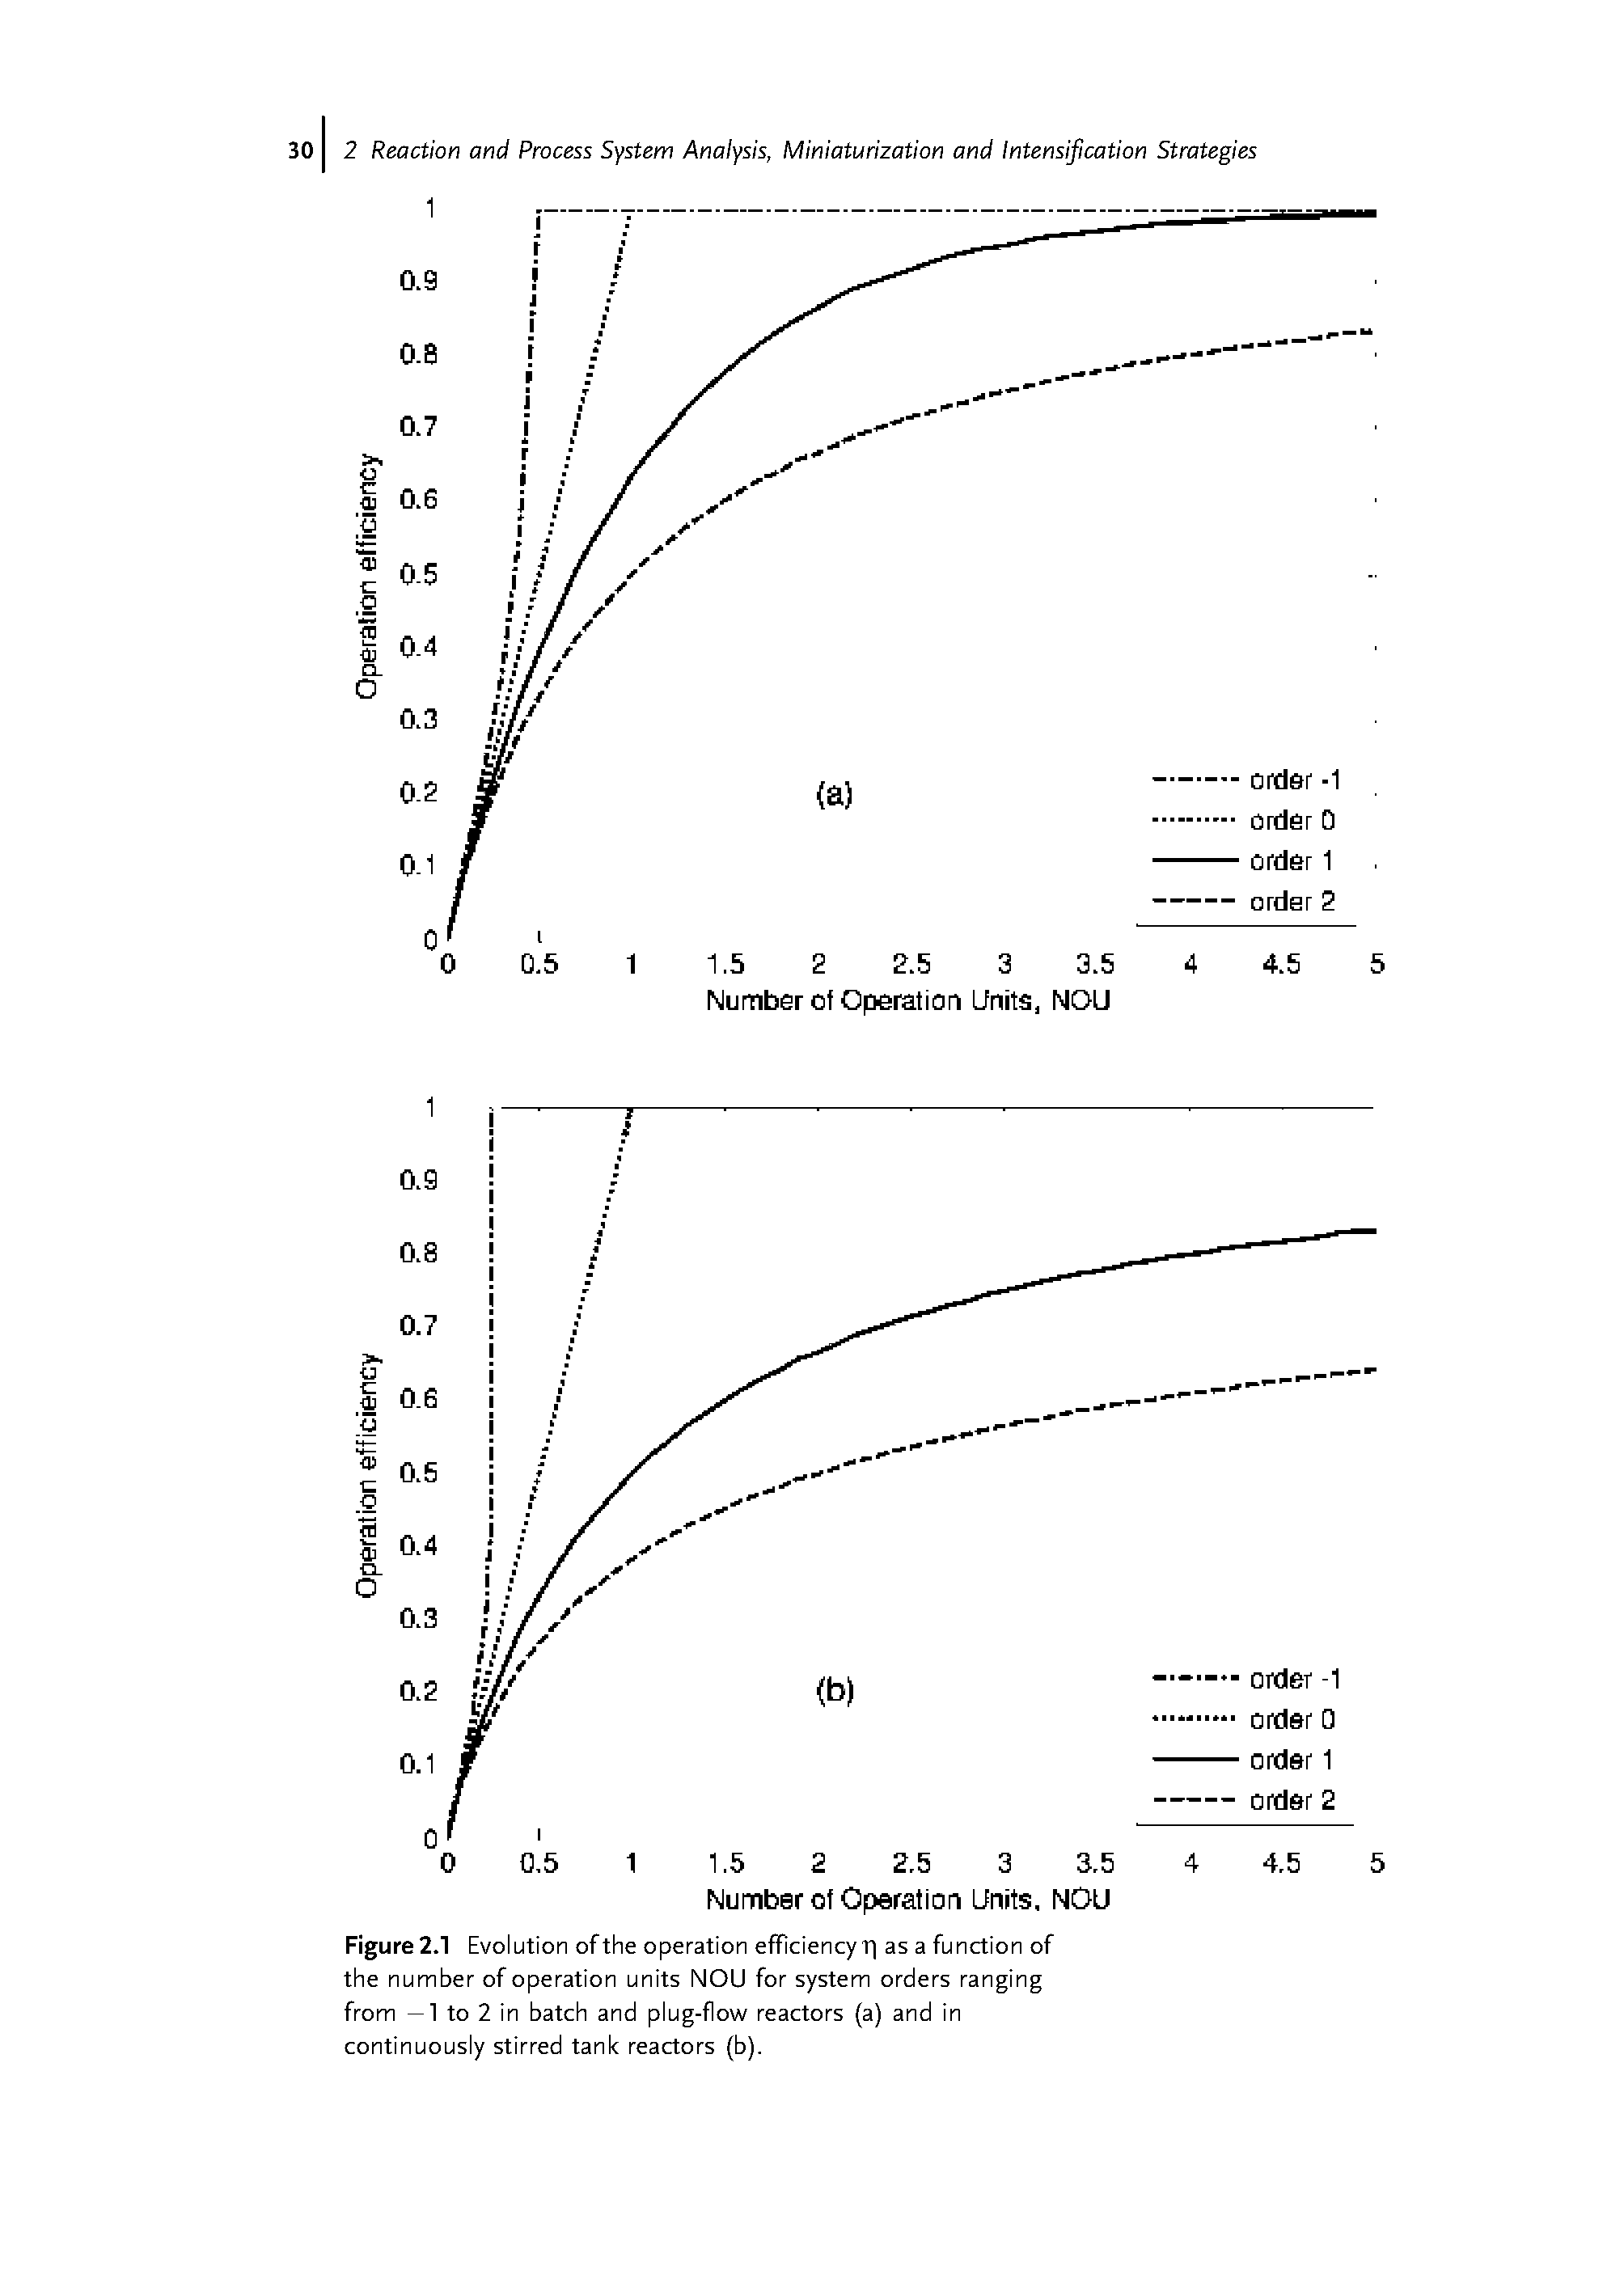 Figure 2.1 Evolution ofthe operation efficiency T as a function of the number of operation units NOU for system orders ranging from —1 to 2 in batch and plug-flow reactors (a) and in continuously stirred tank reactors (b).